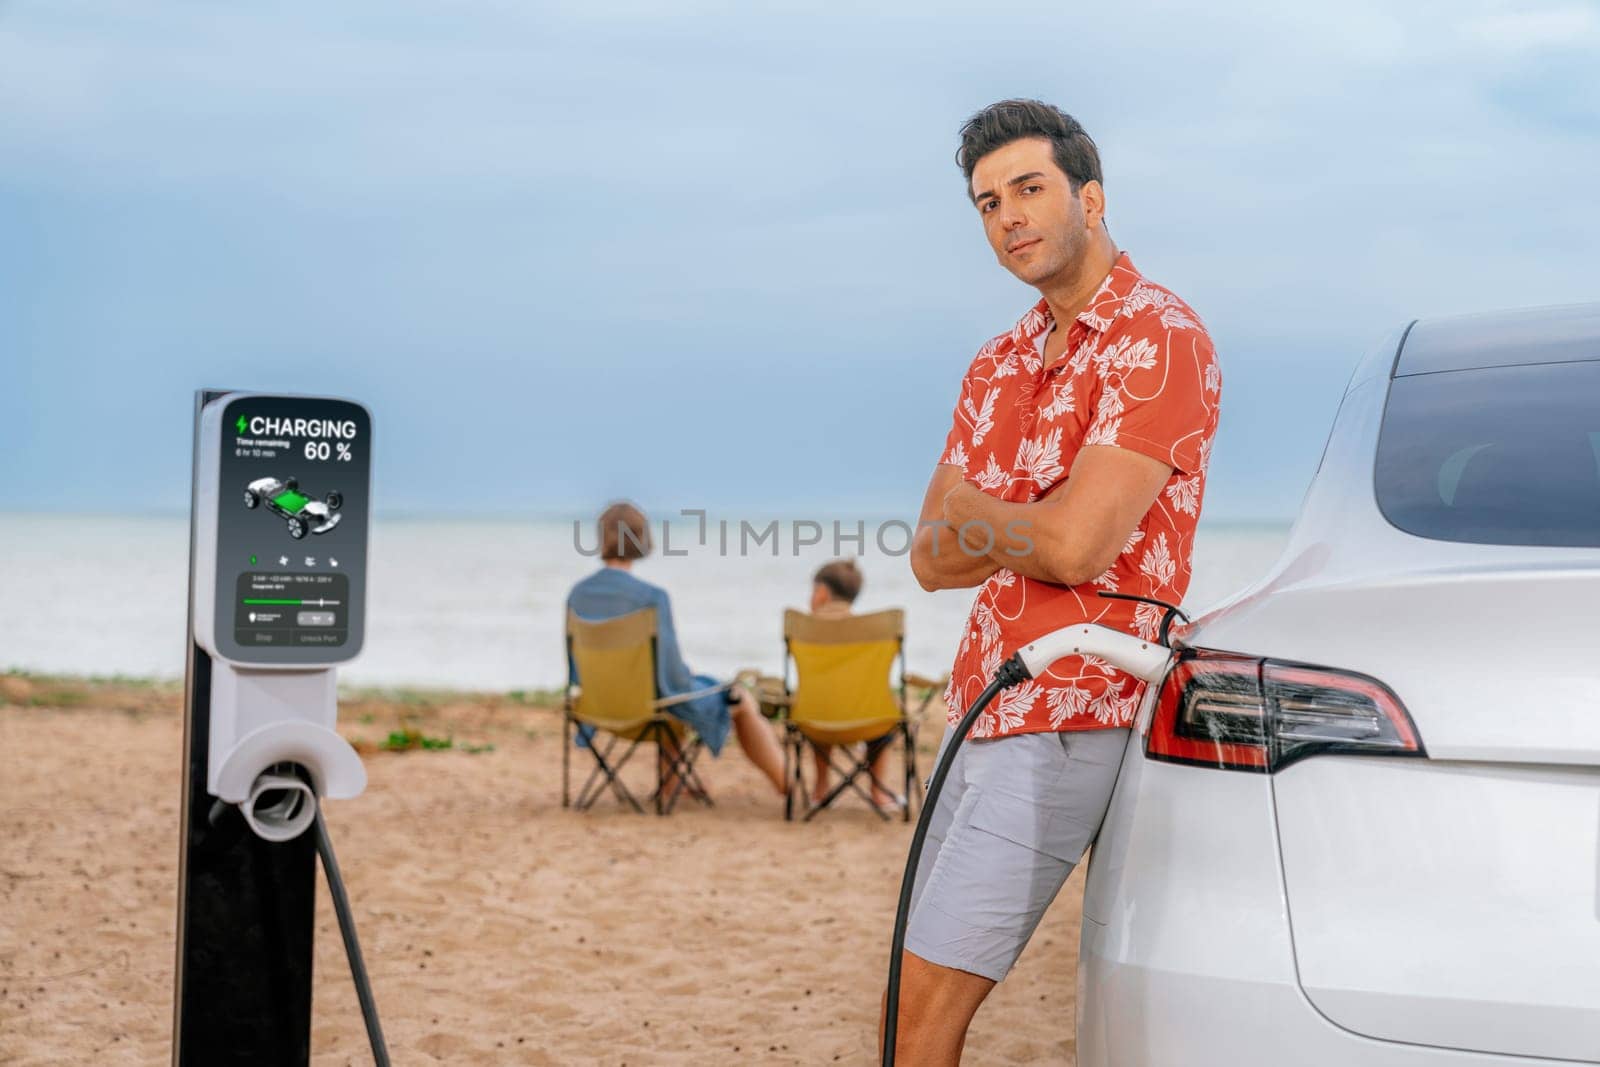 Family vacation trip traveling by the beach with electric car, dad or father recharge EV car while his family enjoy seascape beach. Family trip with alternative energy and eco-friendly car. Perpetual